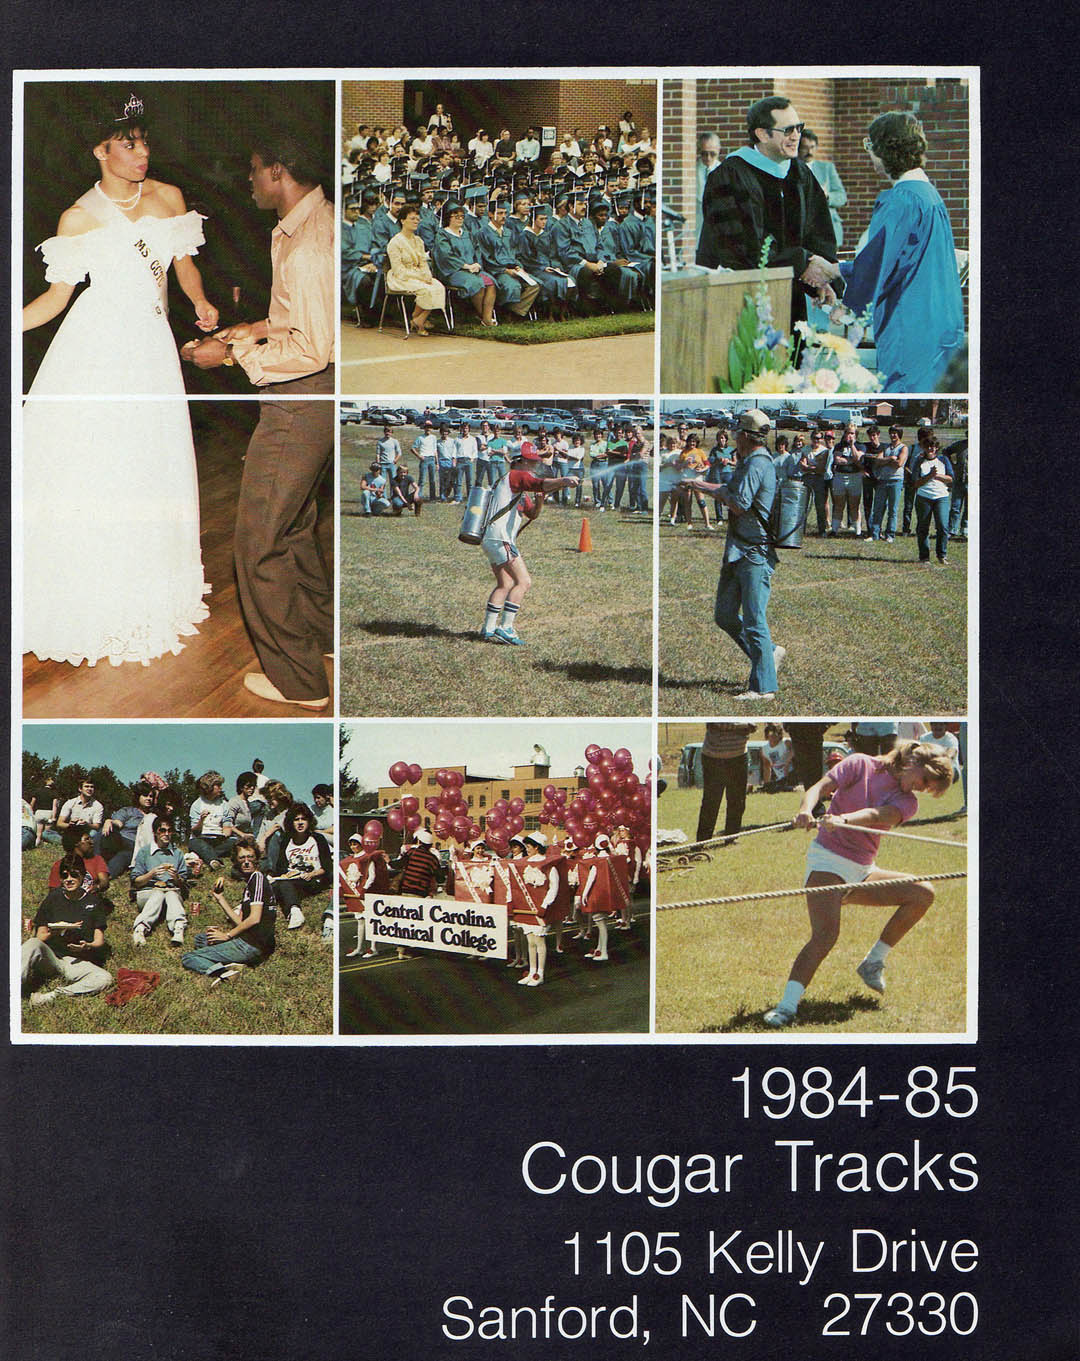  CCCC yearbooks, history online